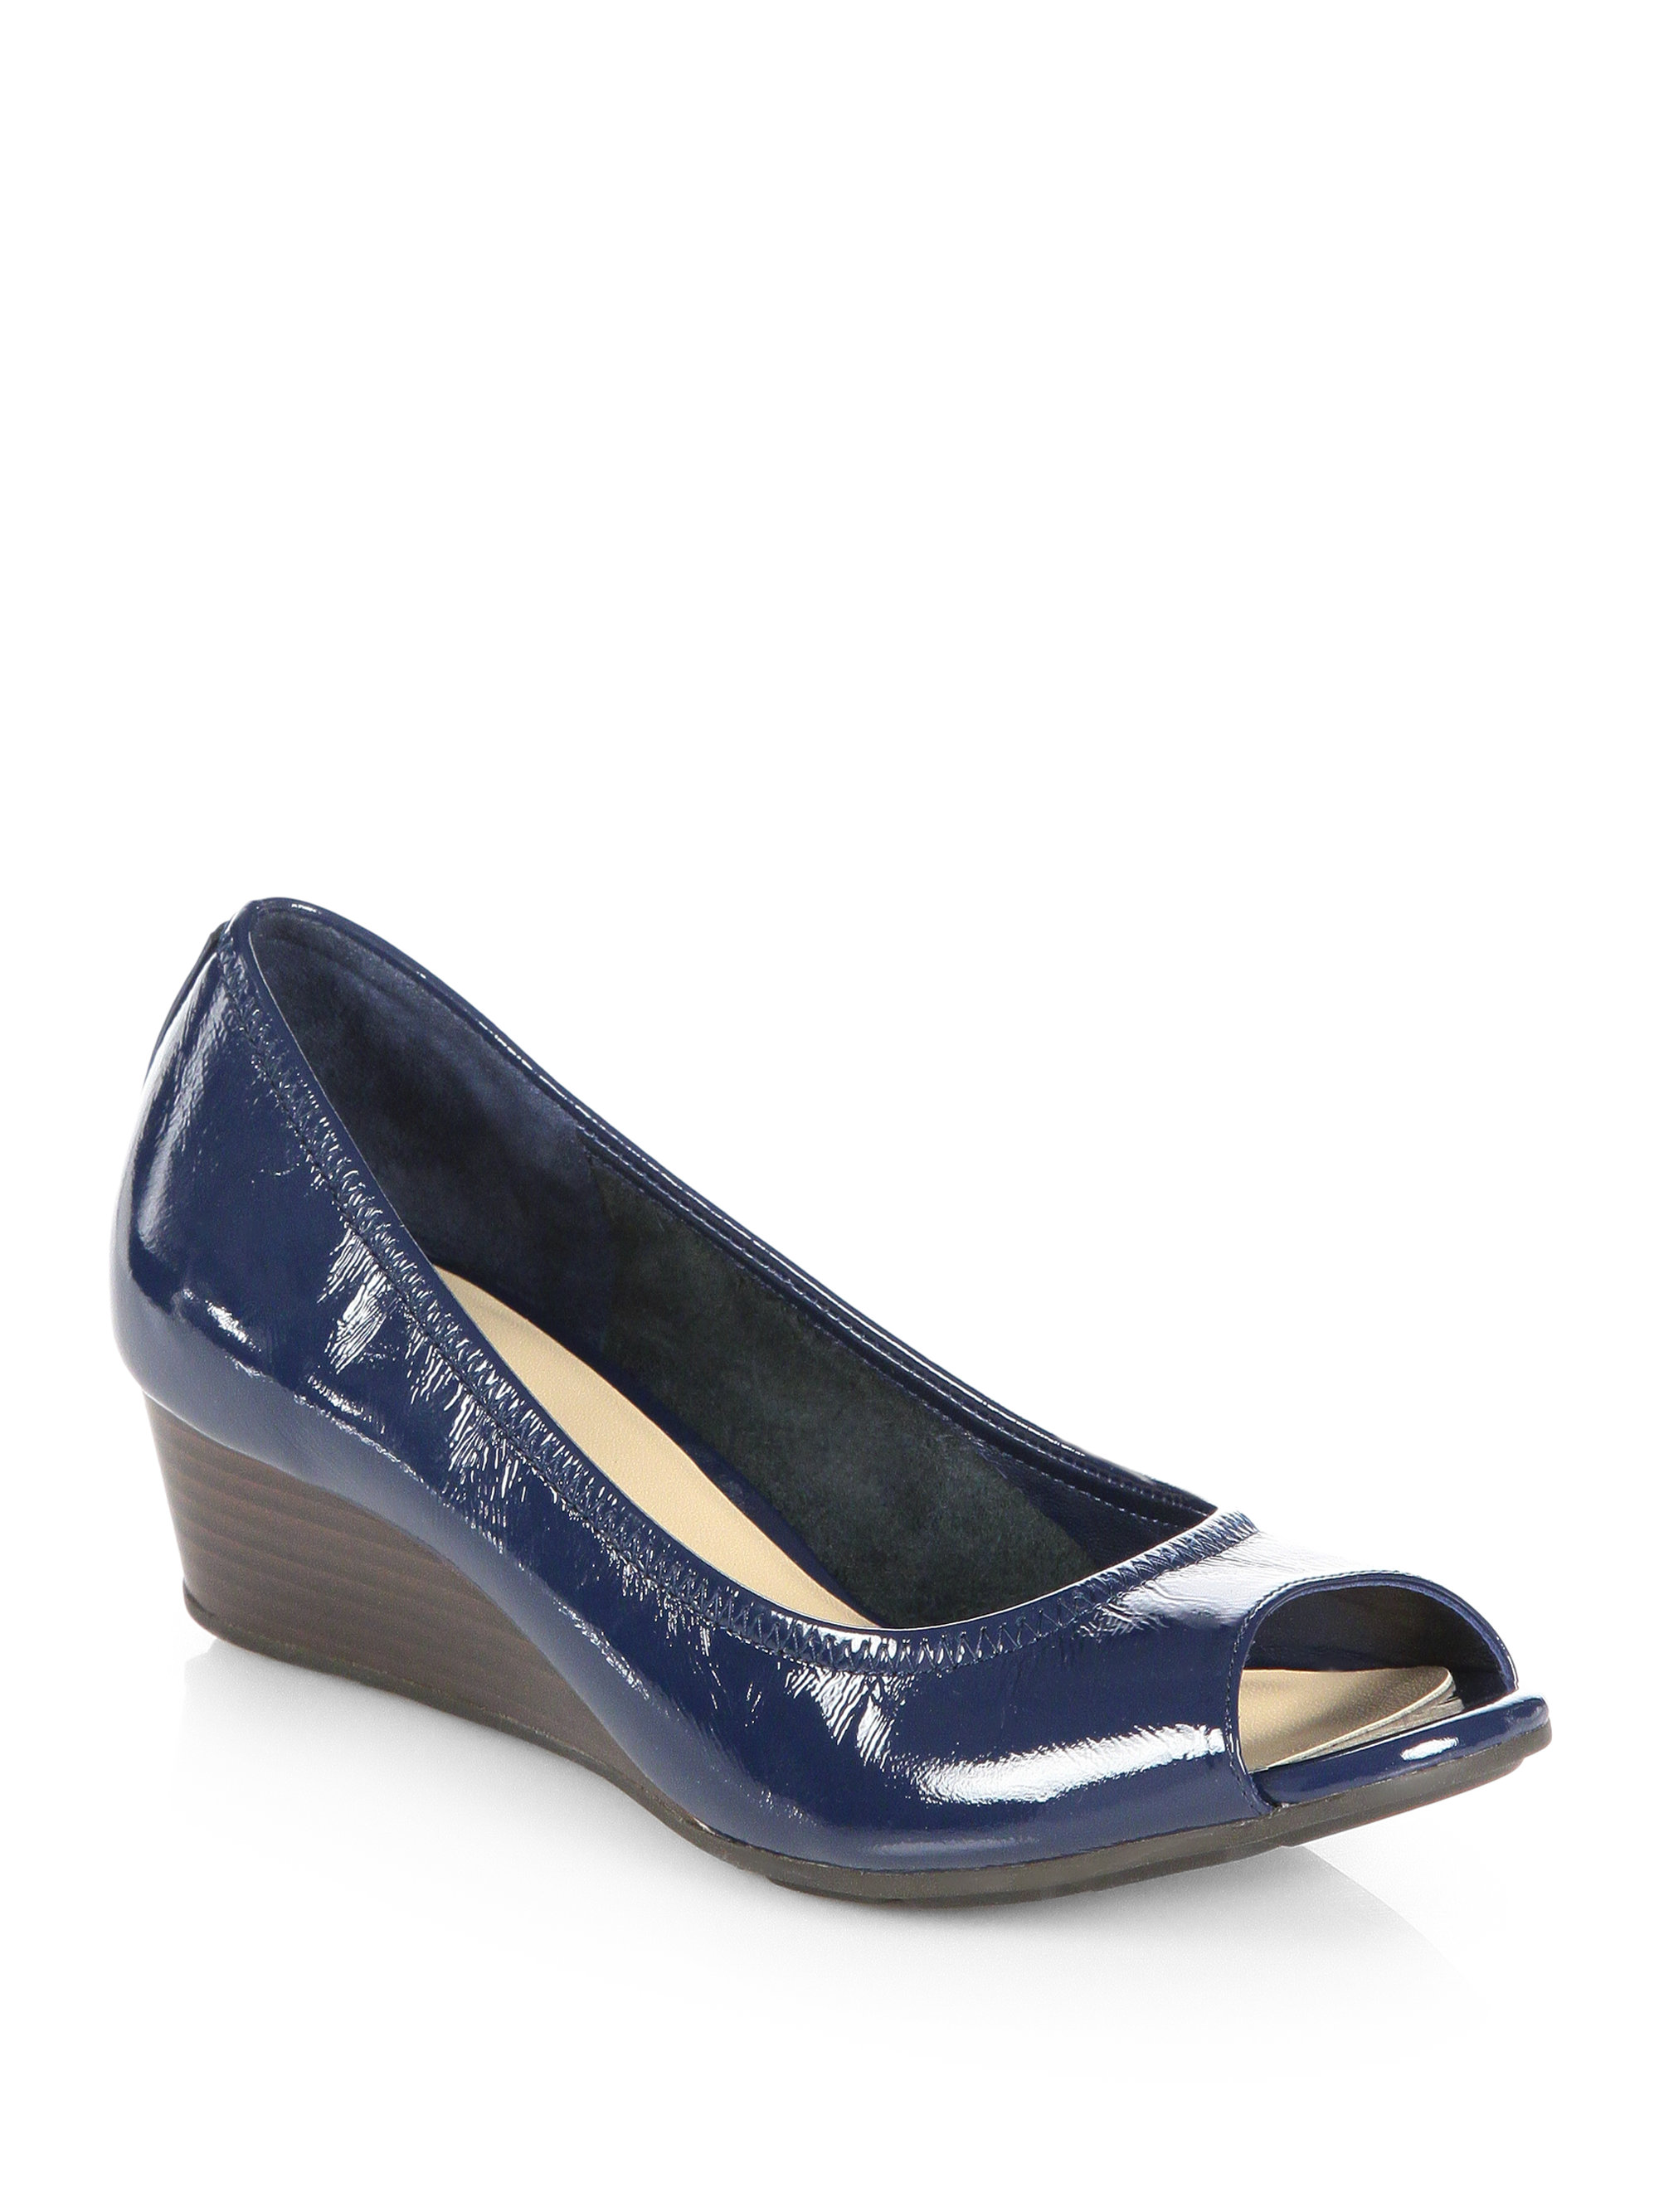 Cole Haan Air Tali Patent Leather Wedge Pumps in Gray (BLUE) | Lyst